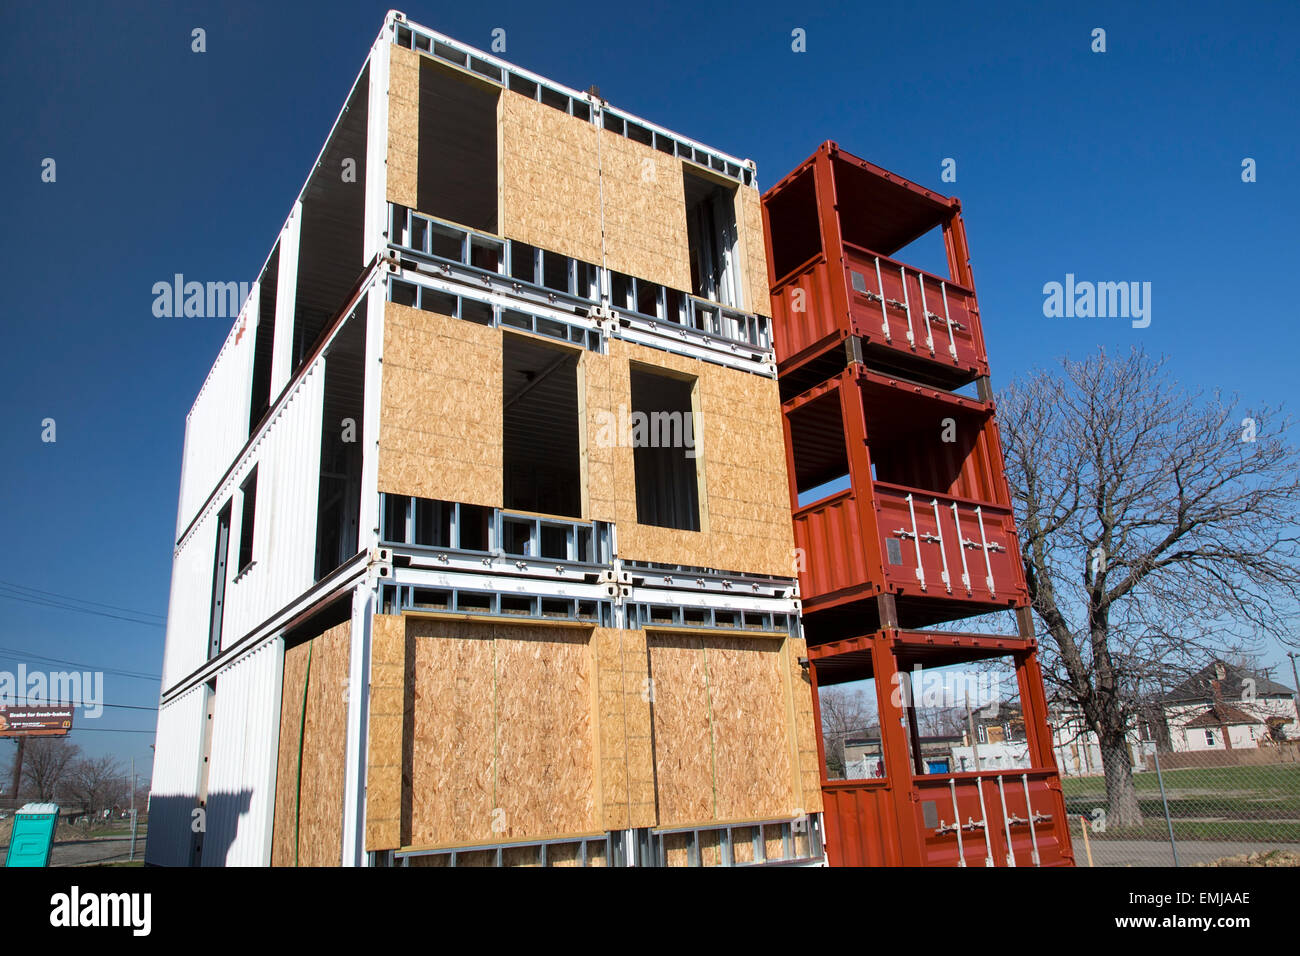 Detroit, Michigan - An apartment building being constructed from used shipping containers. Stock Photo